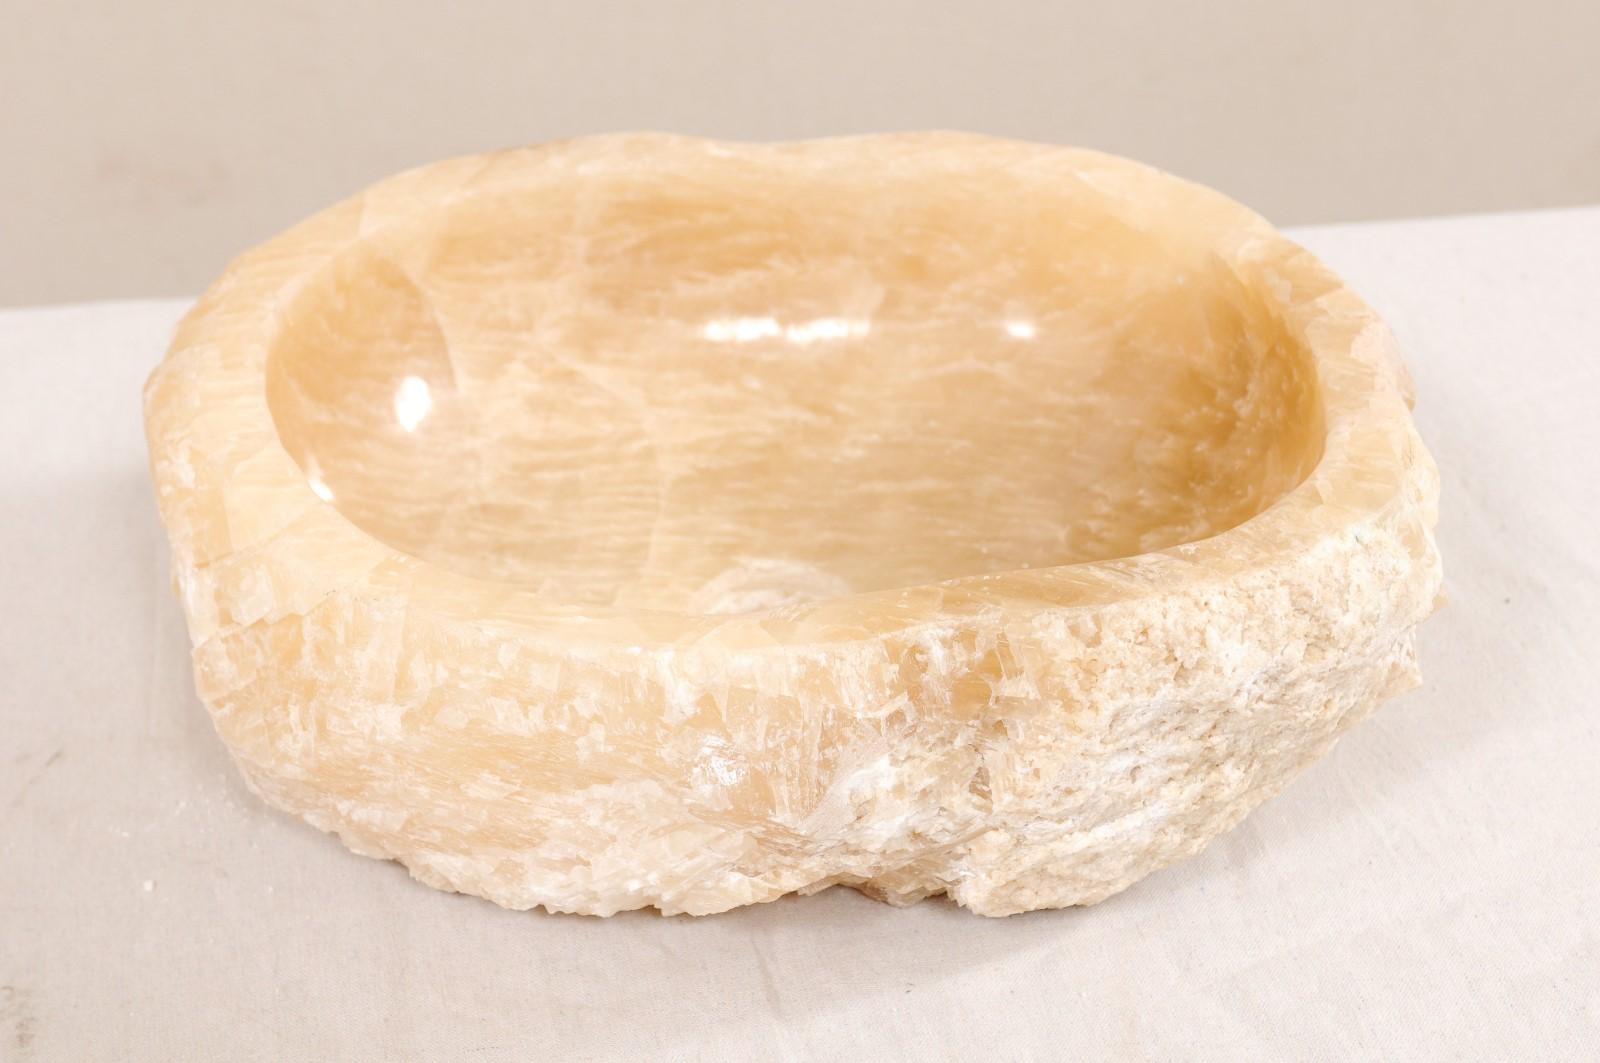 Carved Onyx Rock Sink Basin in Cream Color 6